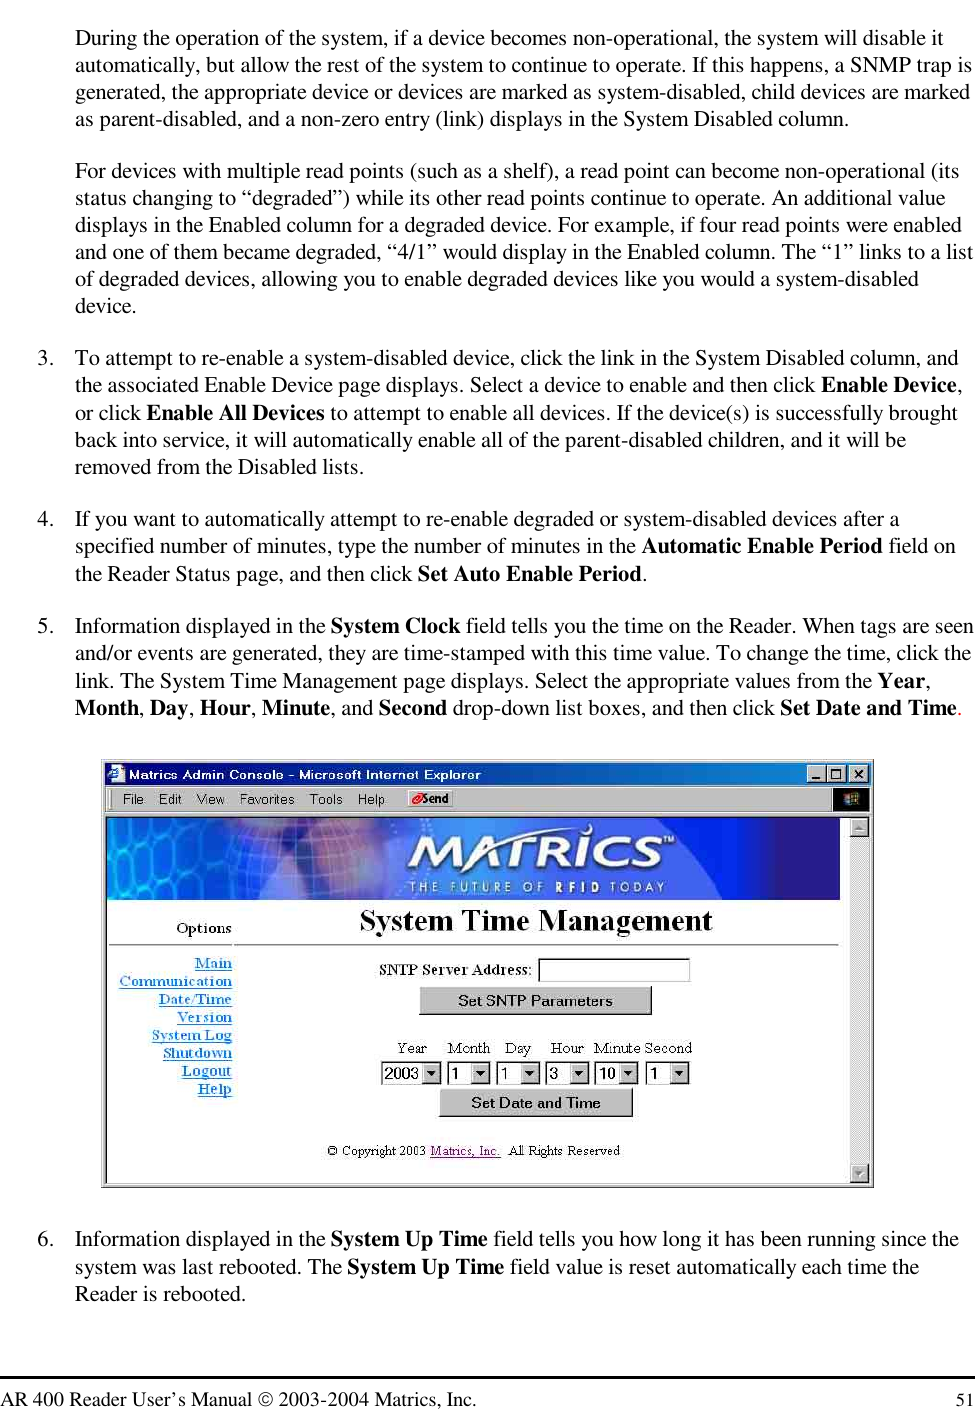   AR 400 Reader User’s Manual  2003-2004 Matrics, Inc.  51 During the operation of the system, if a device becomes non-operational, the system will disable it automatically, but allow the rest of the system to continue to operate. If this happens, a SNMP trap is generated, the appropriate device or devices are marked as system-disabled, child devices are marked as parent-disabled, and a non-zero entry (link) displays in the System Disabled column. For devices with multiple read points (such as a shelf), a read point can become non-operational (its status changing to “degraded”) while its other read points continue to operate. An additional value displays in the Enabled column for a degraded device. For example, if four read points were enabled and one of them became degraded, “4/1” would display in the Enabled column. The “1” links to a list of degraded devices, allowing you to enable degraded devices like you would a system-disabled device. 3.  To attempt to re-enable a system-disabled device, click the link in the System Disabled column, and the associated Enable Device page displays. Select a device to enable and then click Enable Device, or click Enable All Devices to attempt to enable all devices. If the device(s) is successfully brought back into service, it will automatically enable all of the parent-disabled children, and it will be removed from the Disabled lists. 4.  If you want to automatically attempt to re-enable degraded or system-disabled devices after a specified number of minutes, type the number of minutes in the Automatic Enable Period field on the Reader Status page, and then click Set Auto Enable Period. 5.  Information displayed in the System Clock field tells you the time on the Reader. When tags are seen and/or events are generated, they are time-stamped with this time value. To change the time, click the link. The System Time Management page displays. Select the appropriate values from the Year, Month, Day, Hour, Minute, and Second drop-down list boxes, and then click Set Date and Time.  6.  Information displayed in the System Up Time field tells you how long it has been running since the system was last rebooted. The System Up Time field value is reset automatically each time the Reader is rebooted.  